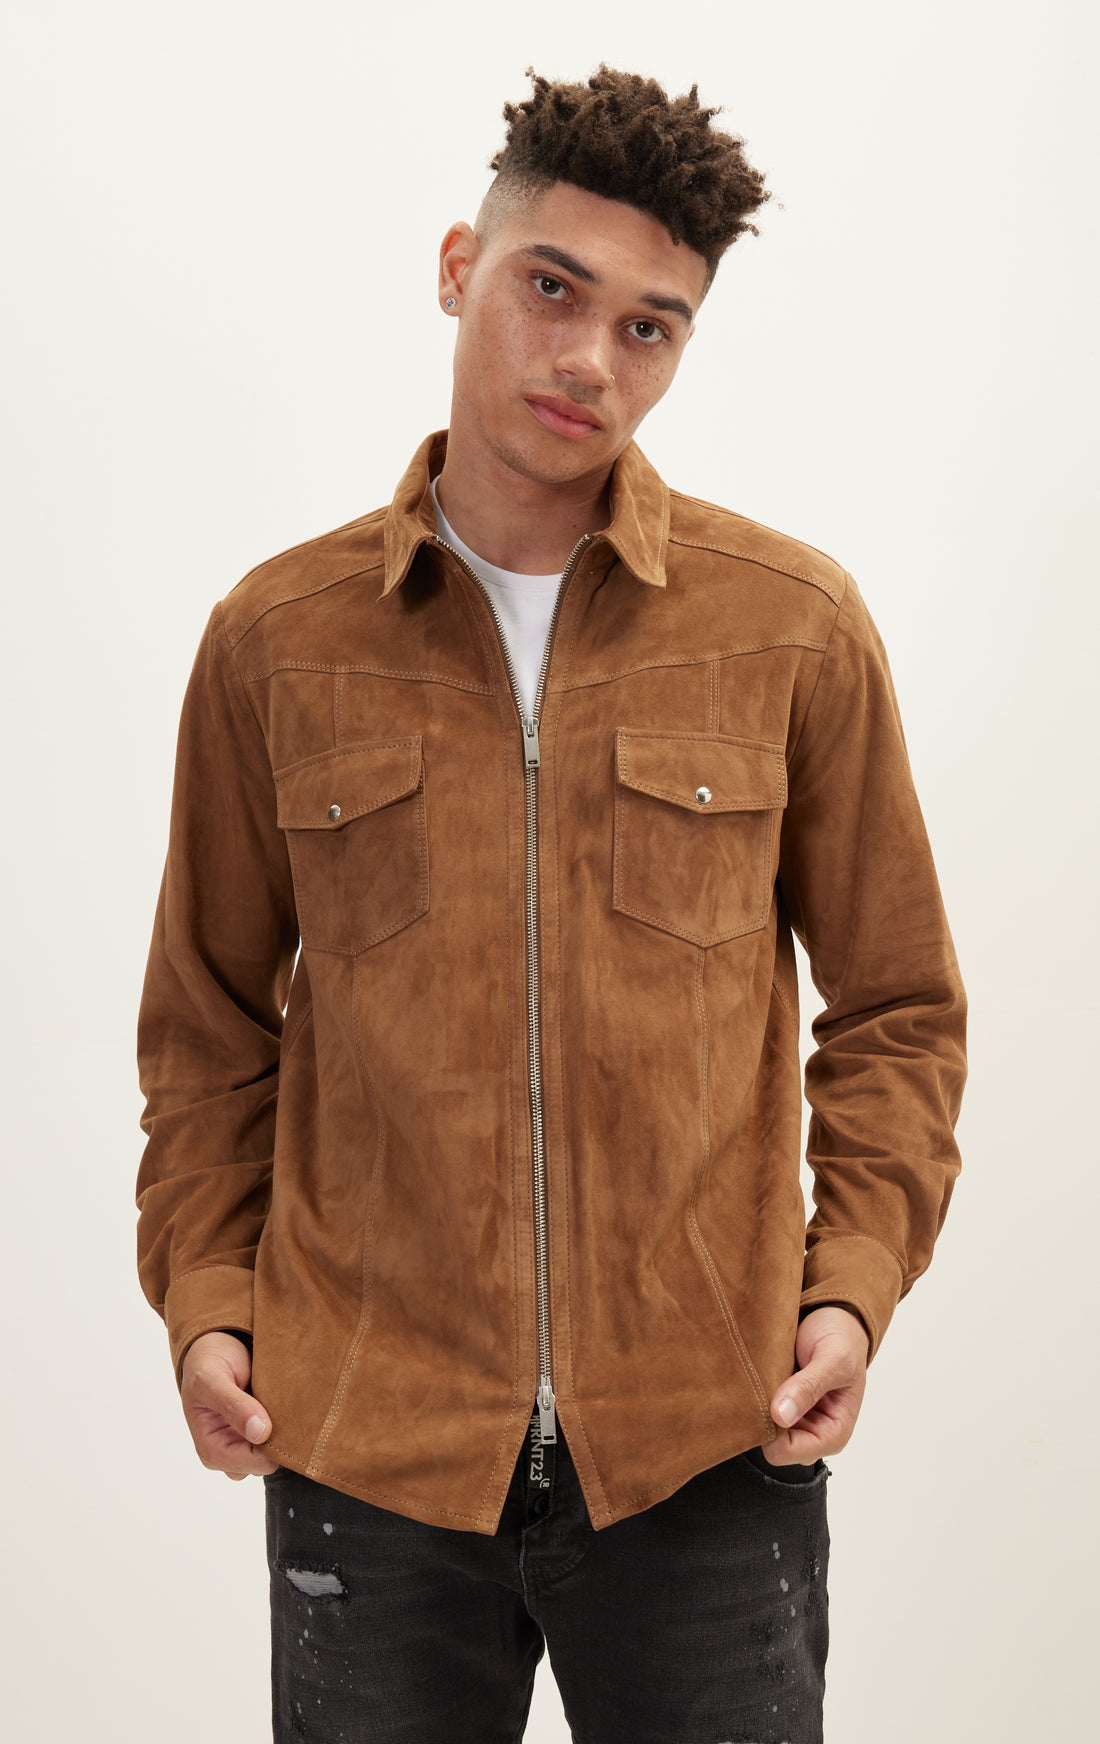 N° 71361 SUEDE LEATHER SHIRT- CAMEL